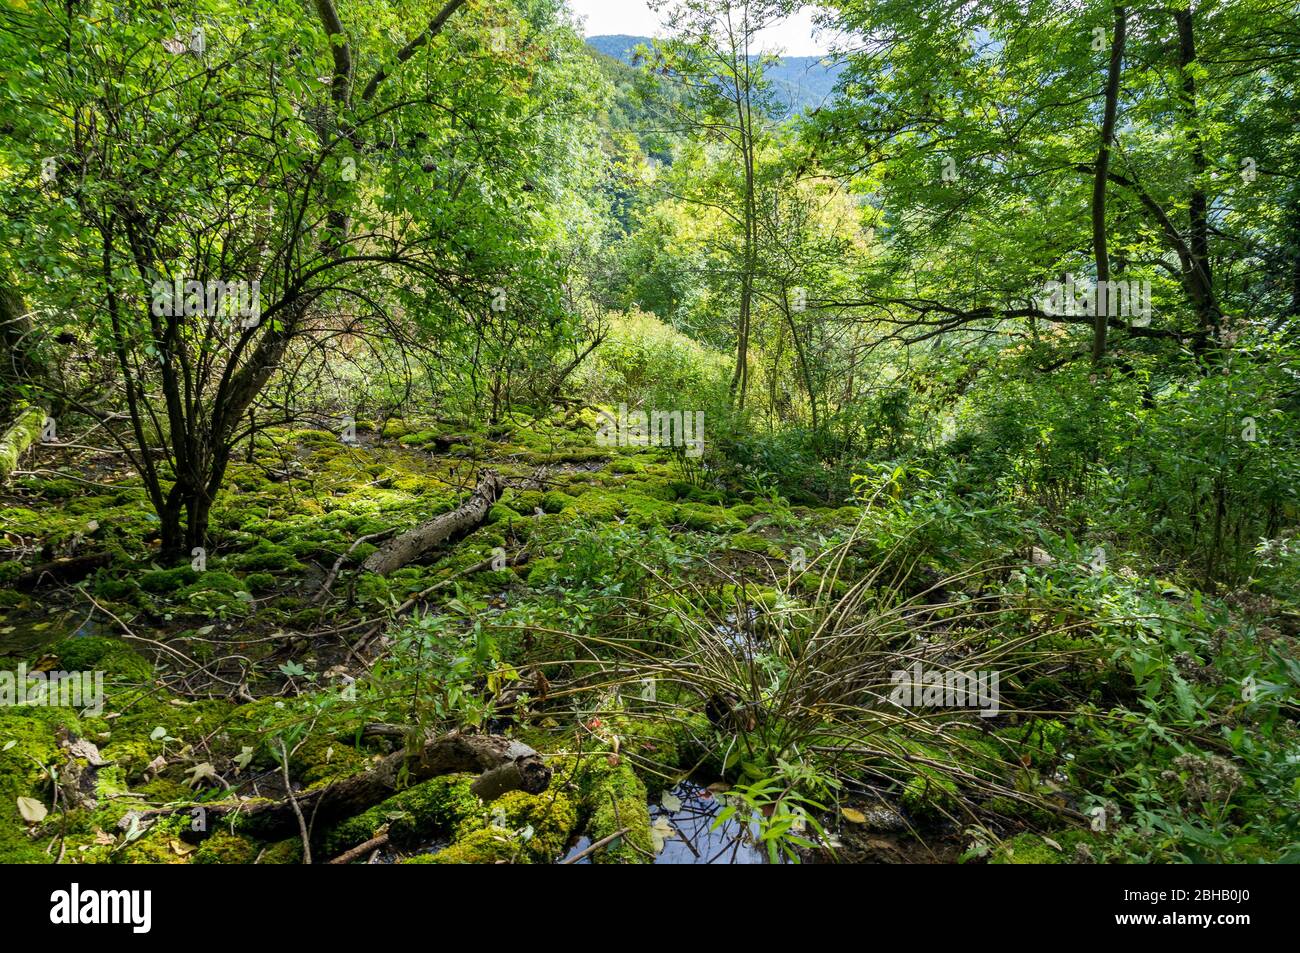 Germany, Baden-Wuerttemberg, Lenningen, layer source fed by the Steinerne Rinne. The spring emerges from the slope a few meters above the Steinerne Rinne. Stock Photo